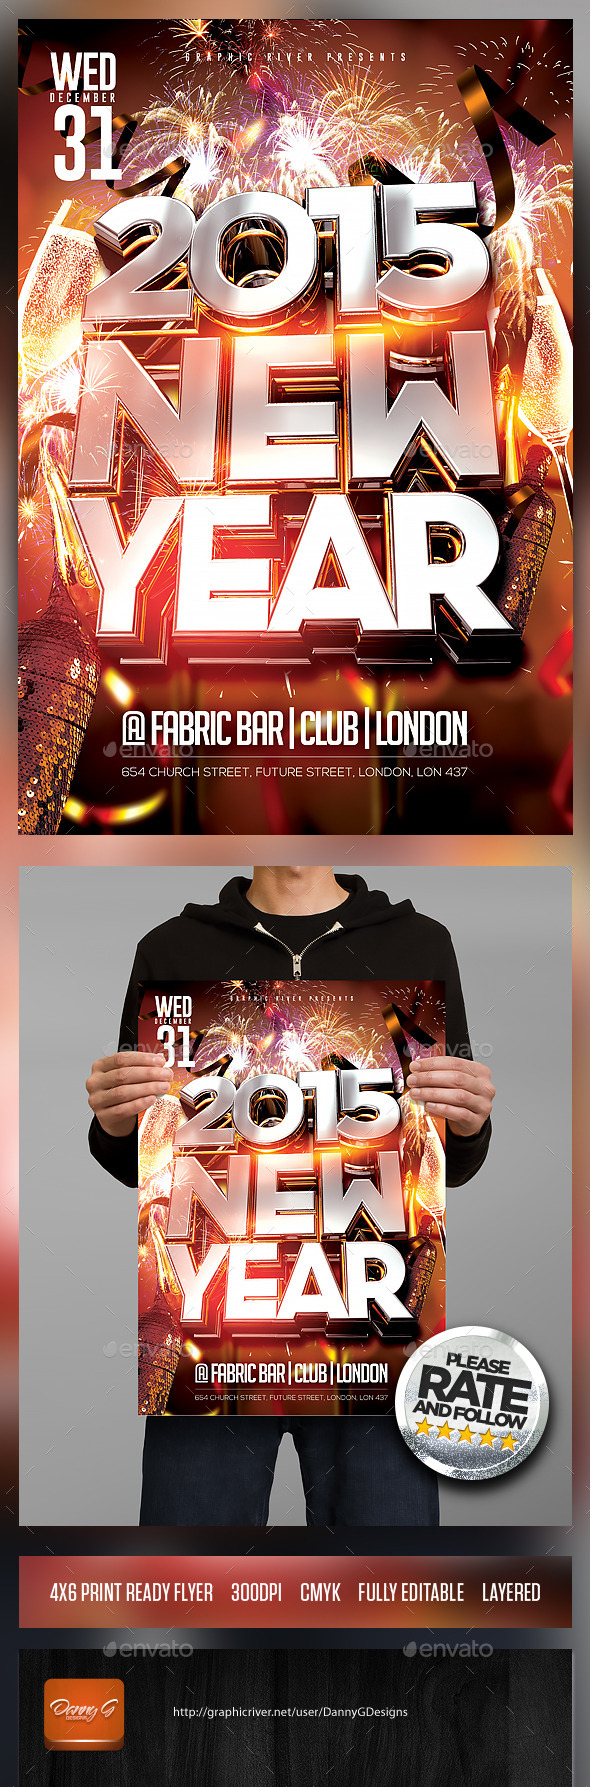 2015 New Year Flyer Template PSD